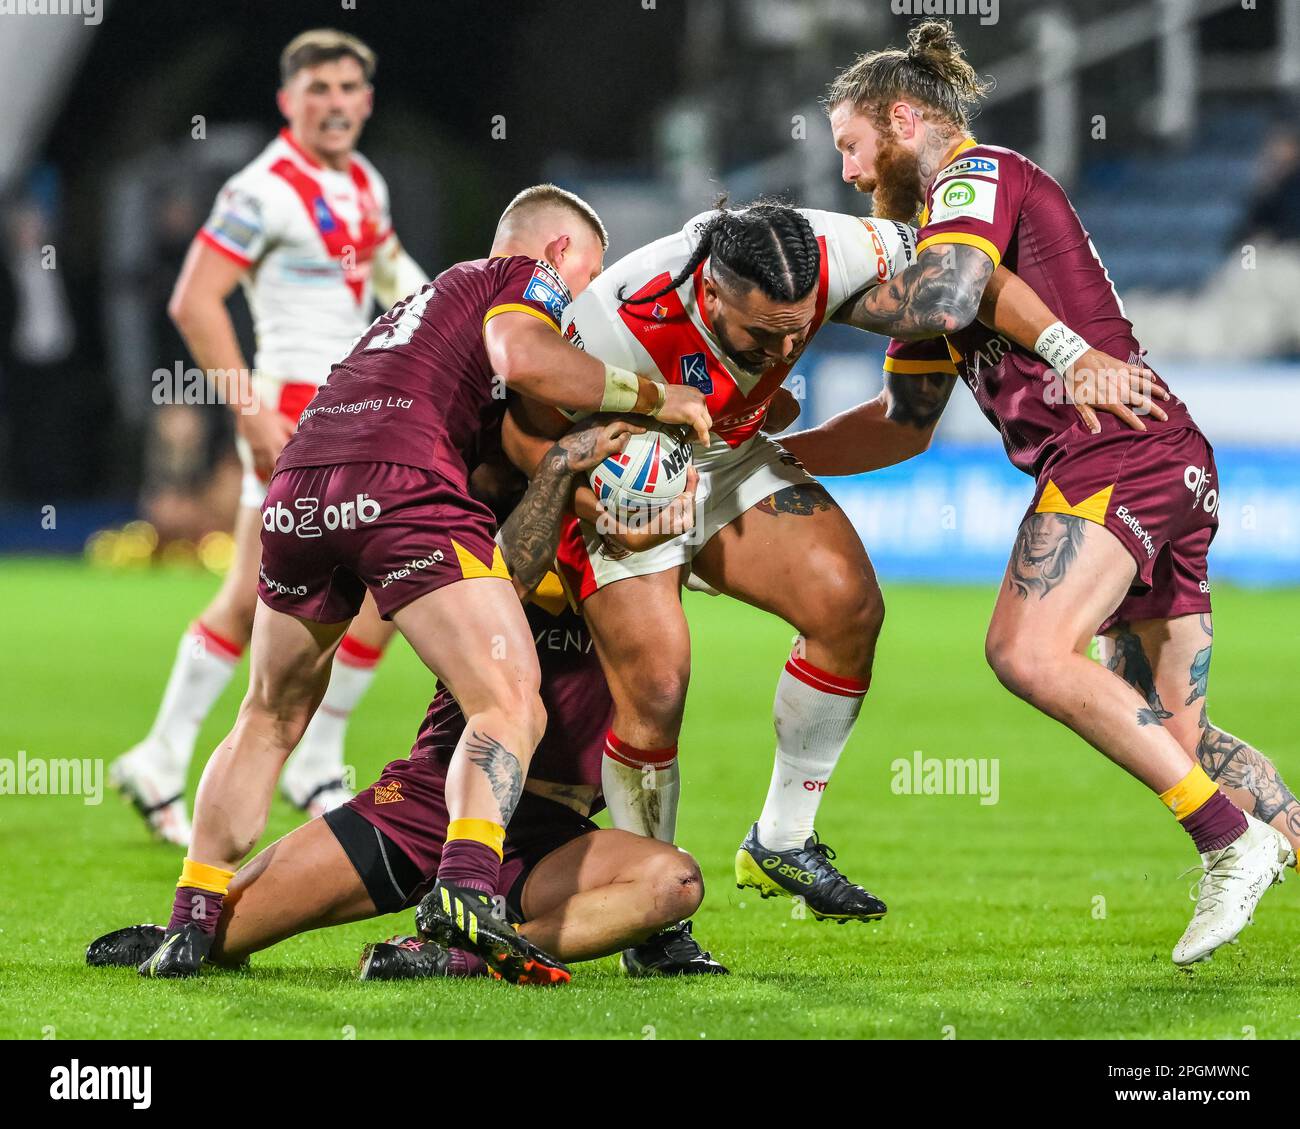 Konrad Hurrell #23 of St Helens is tackled by Chris McQueen #12 and Luke Yates #13 of Huddersfield Giants  during the Betfred Super League Round 6 match Huddersfield Giants vs St Helens at John Smith's Stadium, Huddersfield, United Kingdom, 23rd March 2023  (Photo by Craig Thomas/News Images) Stock Photo